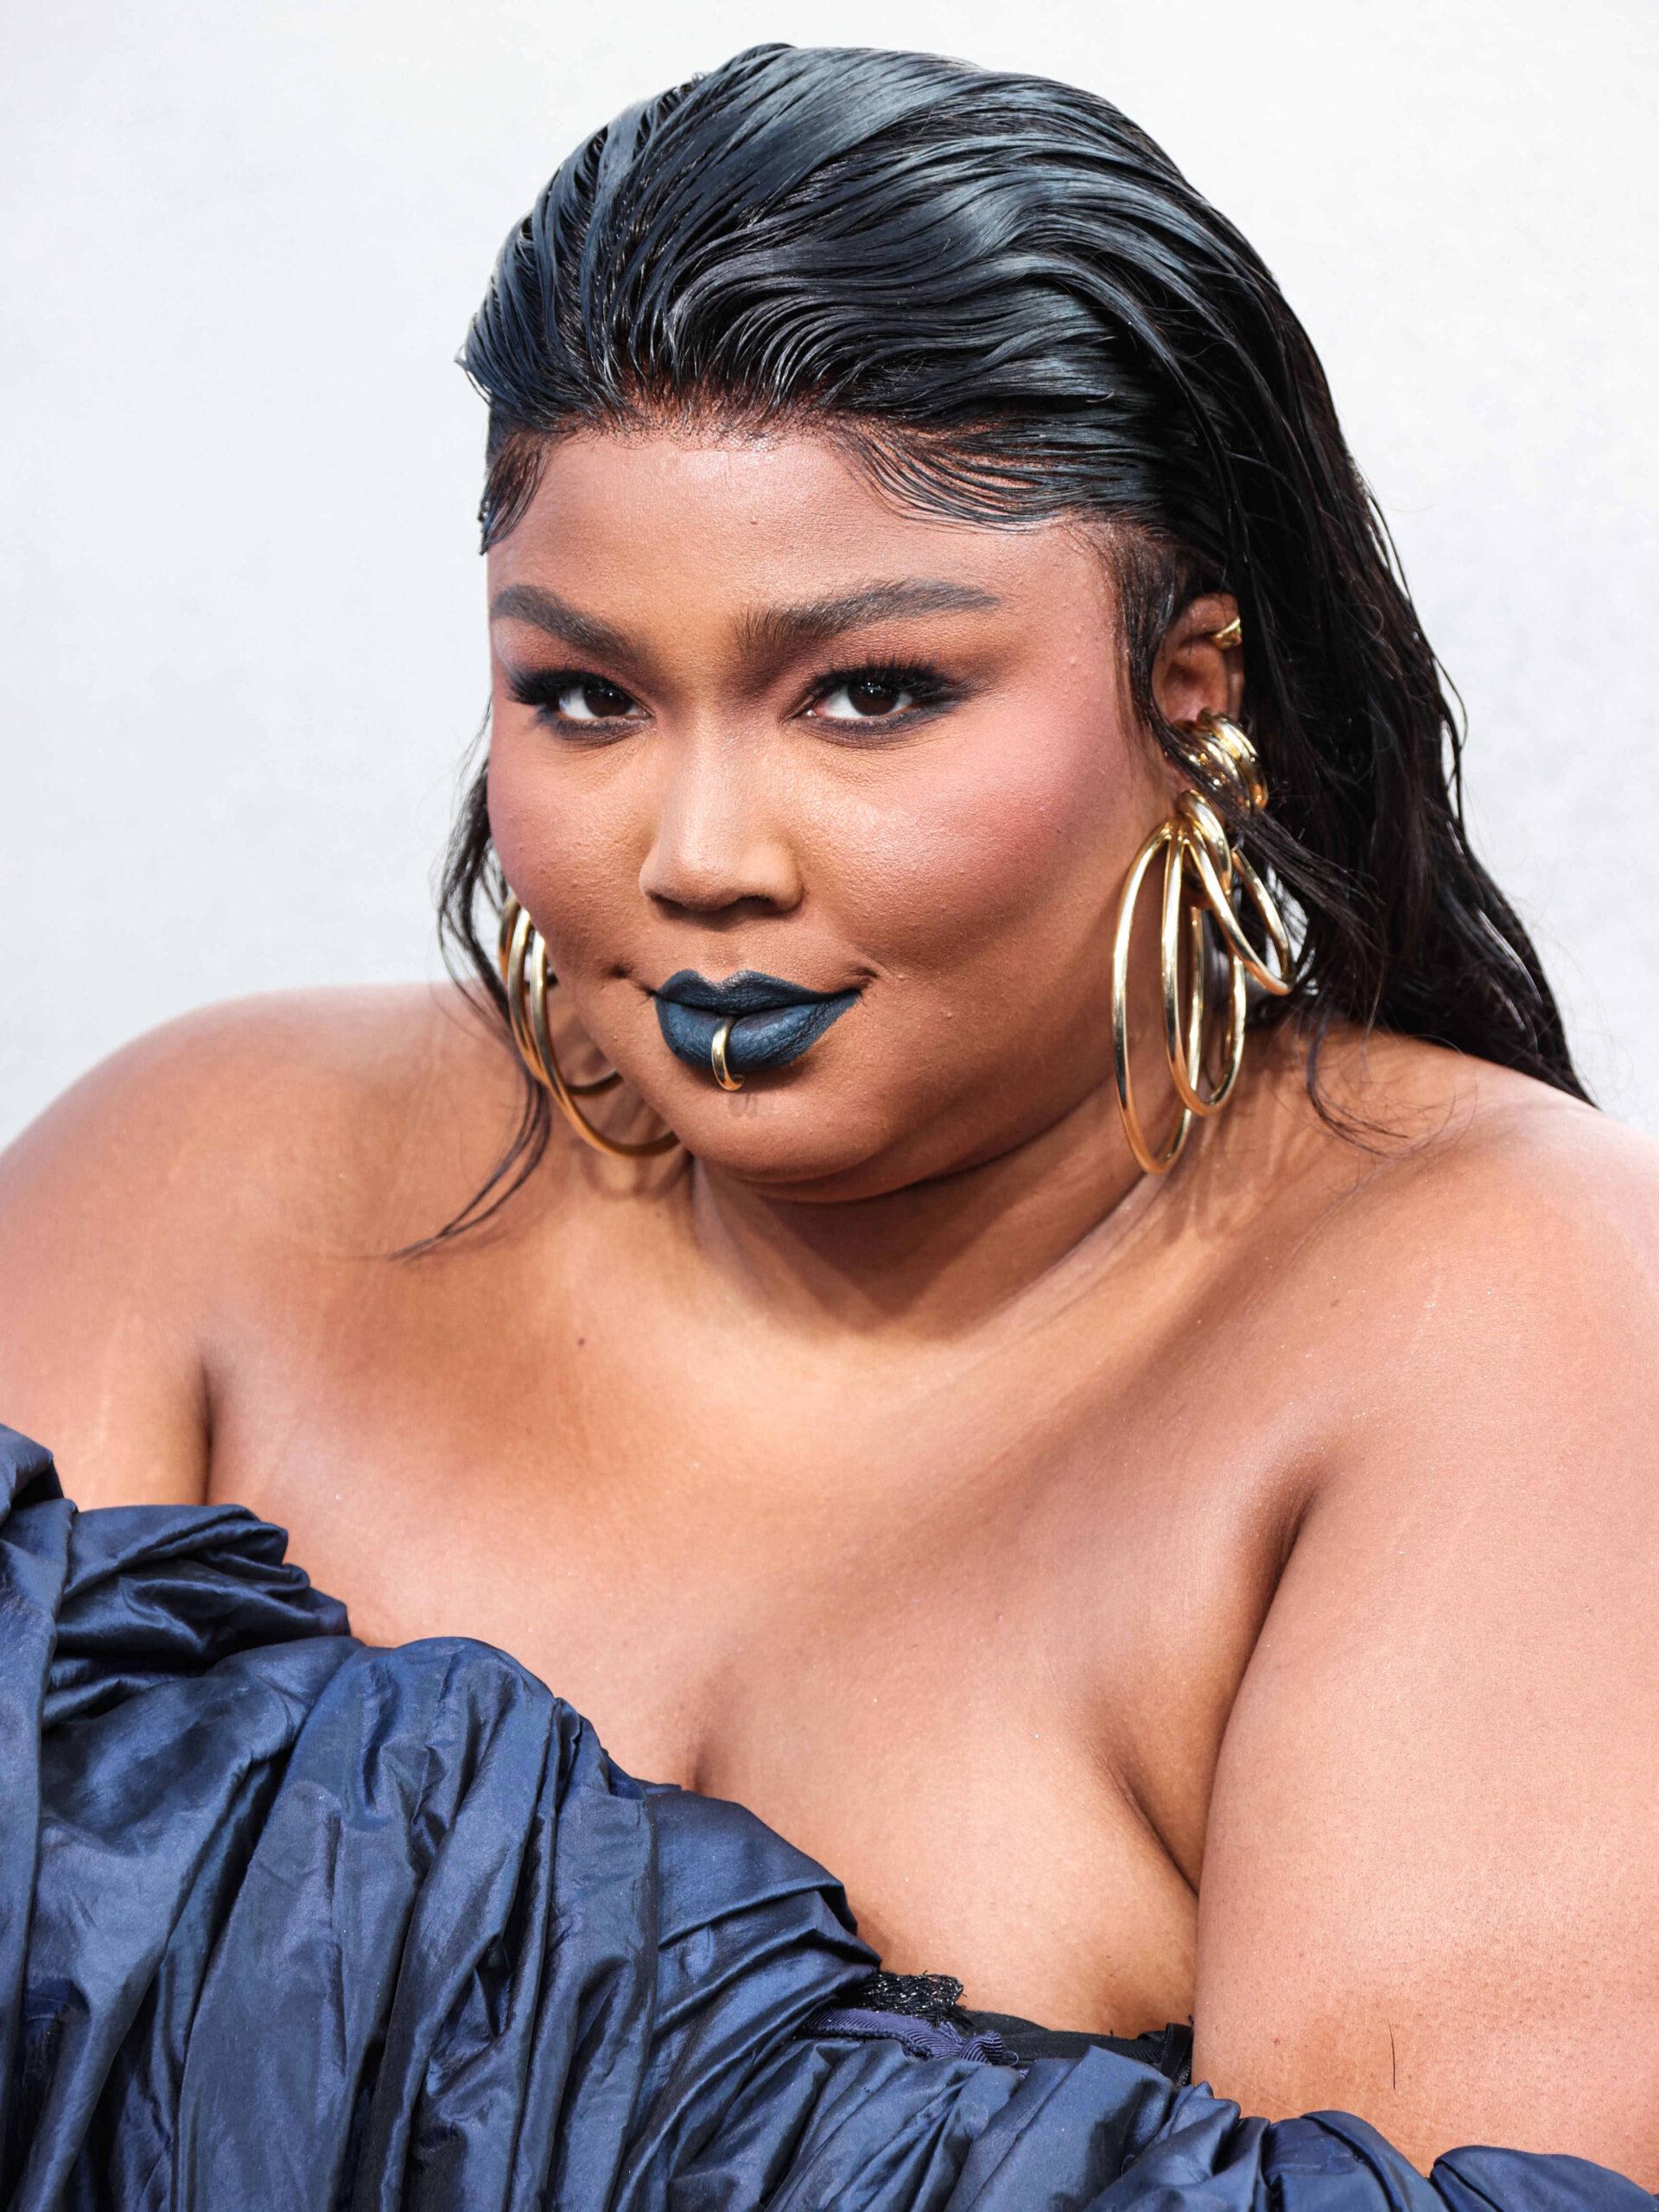 Lizzo wearing a Jean Paul Gaultier Couture dress arrives at the 2022 MTV Video Music Awards